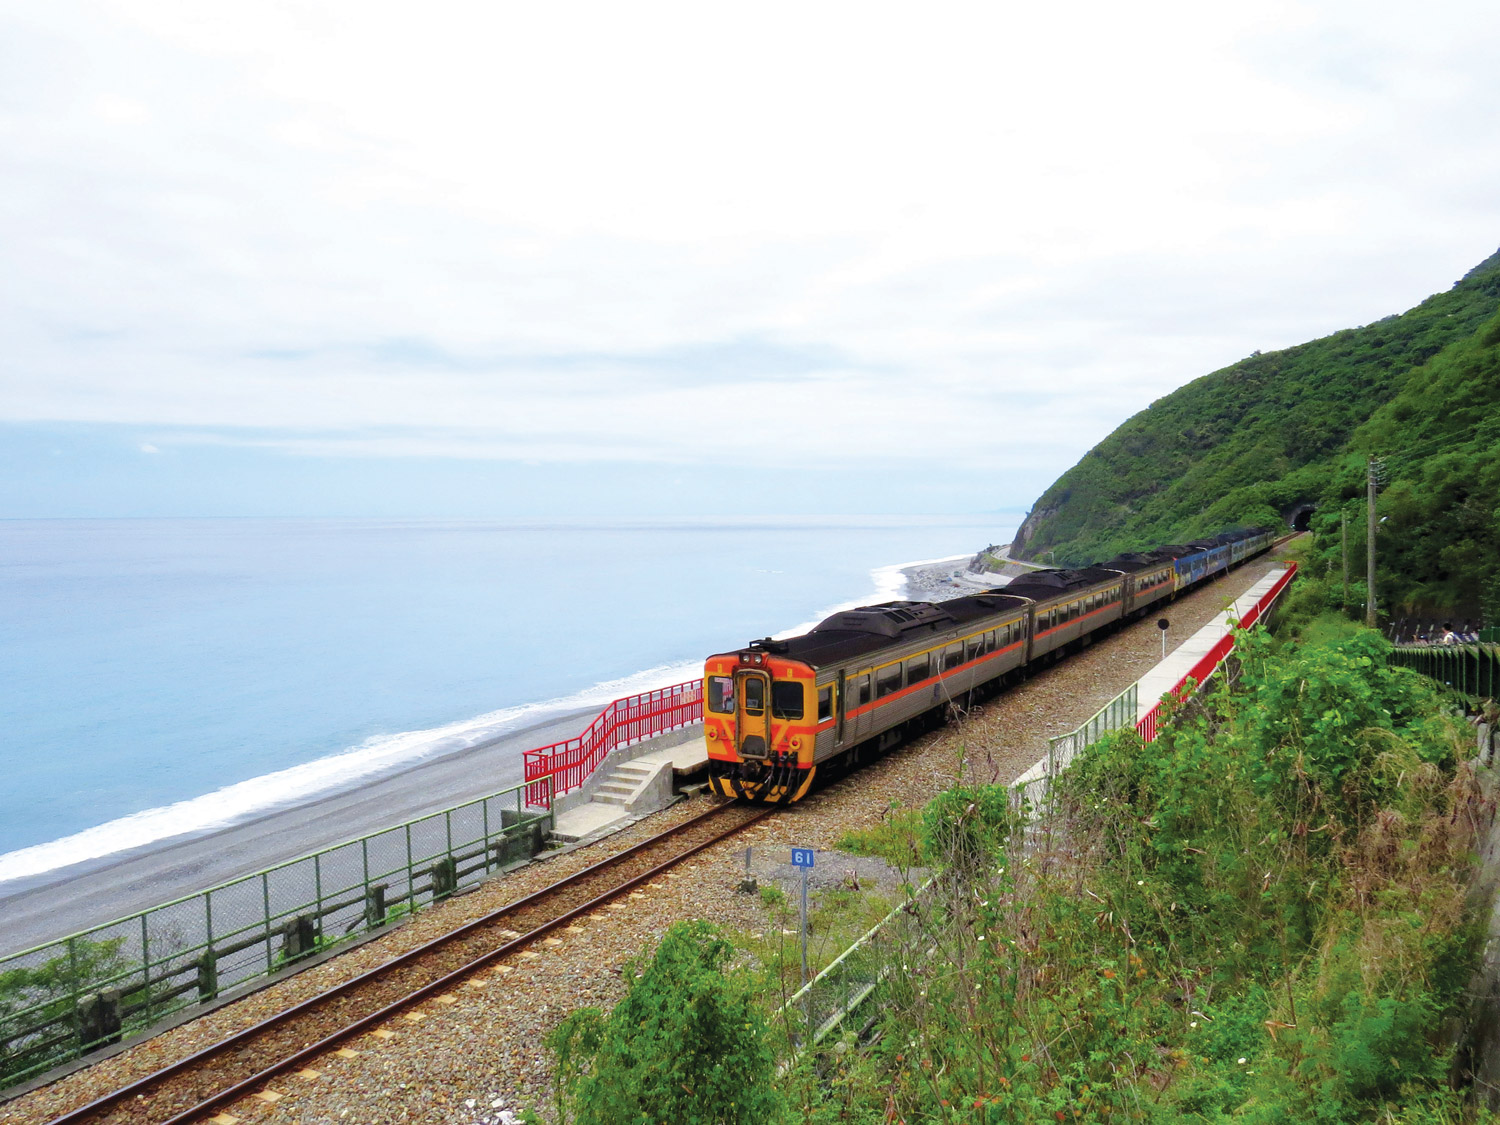 Travelling on the Hualien-Taitung Railway